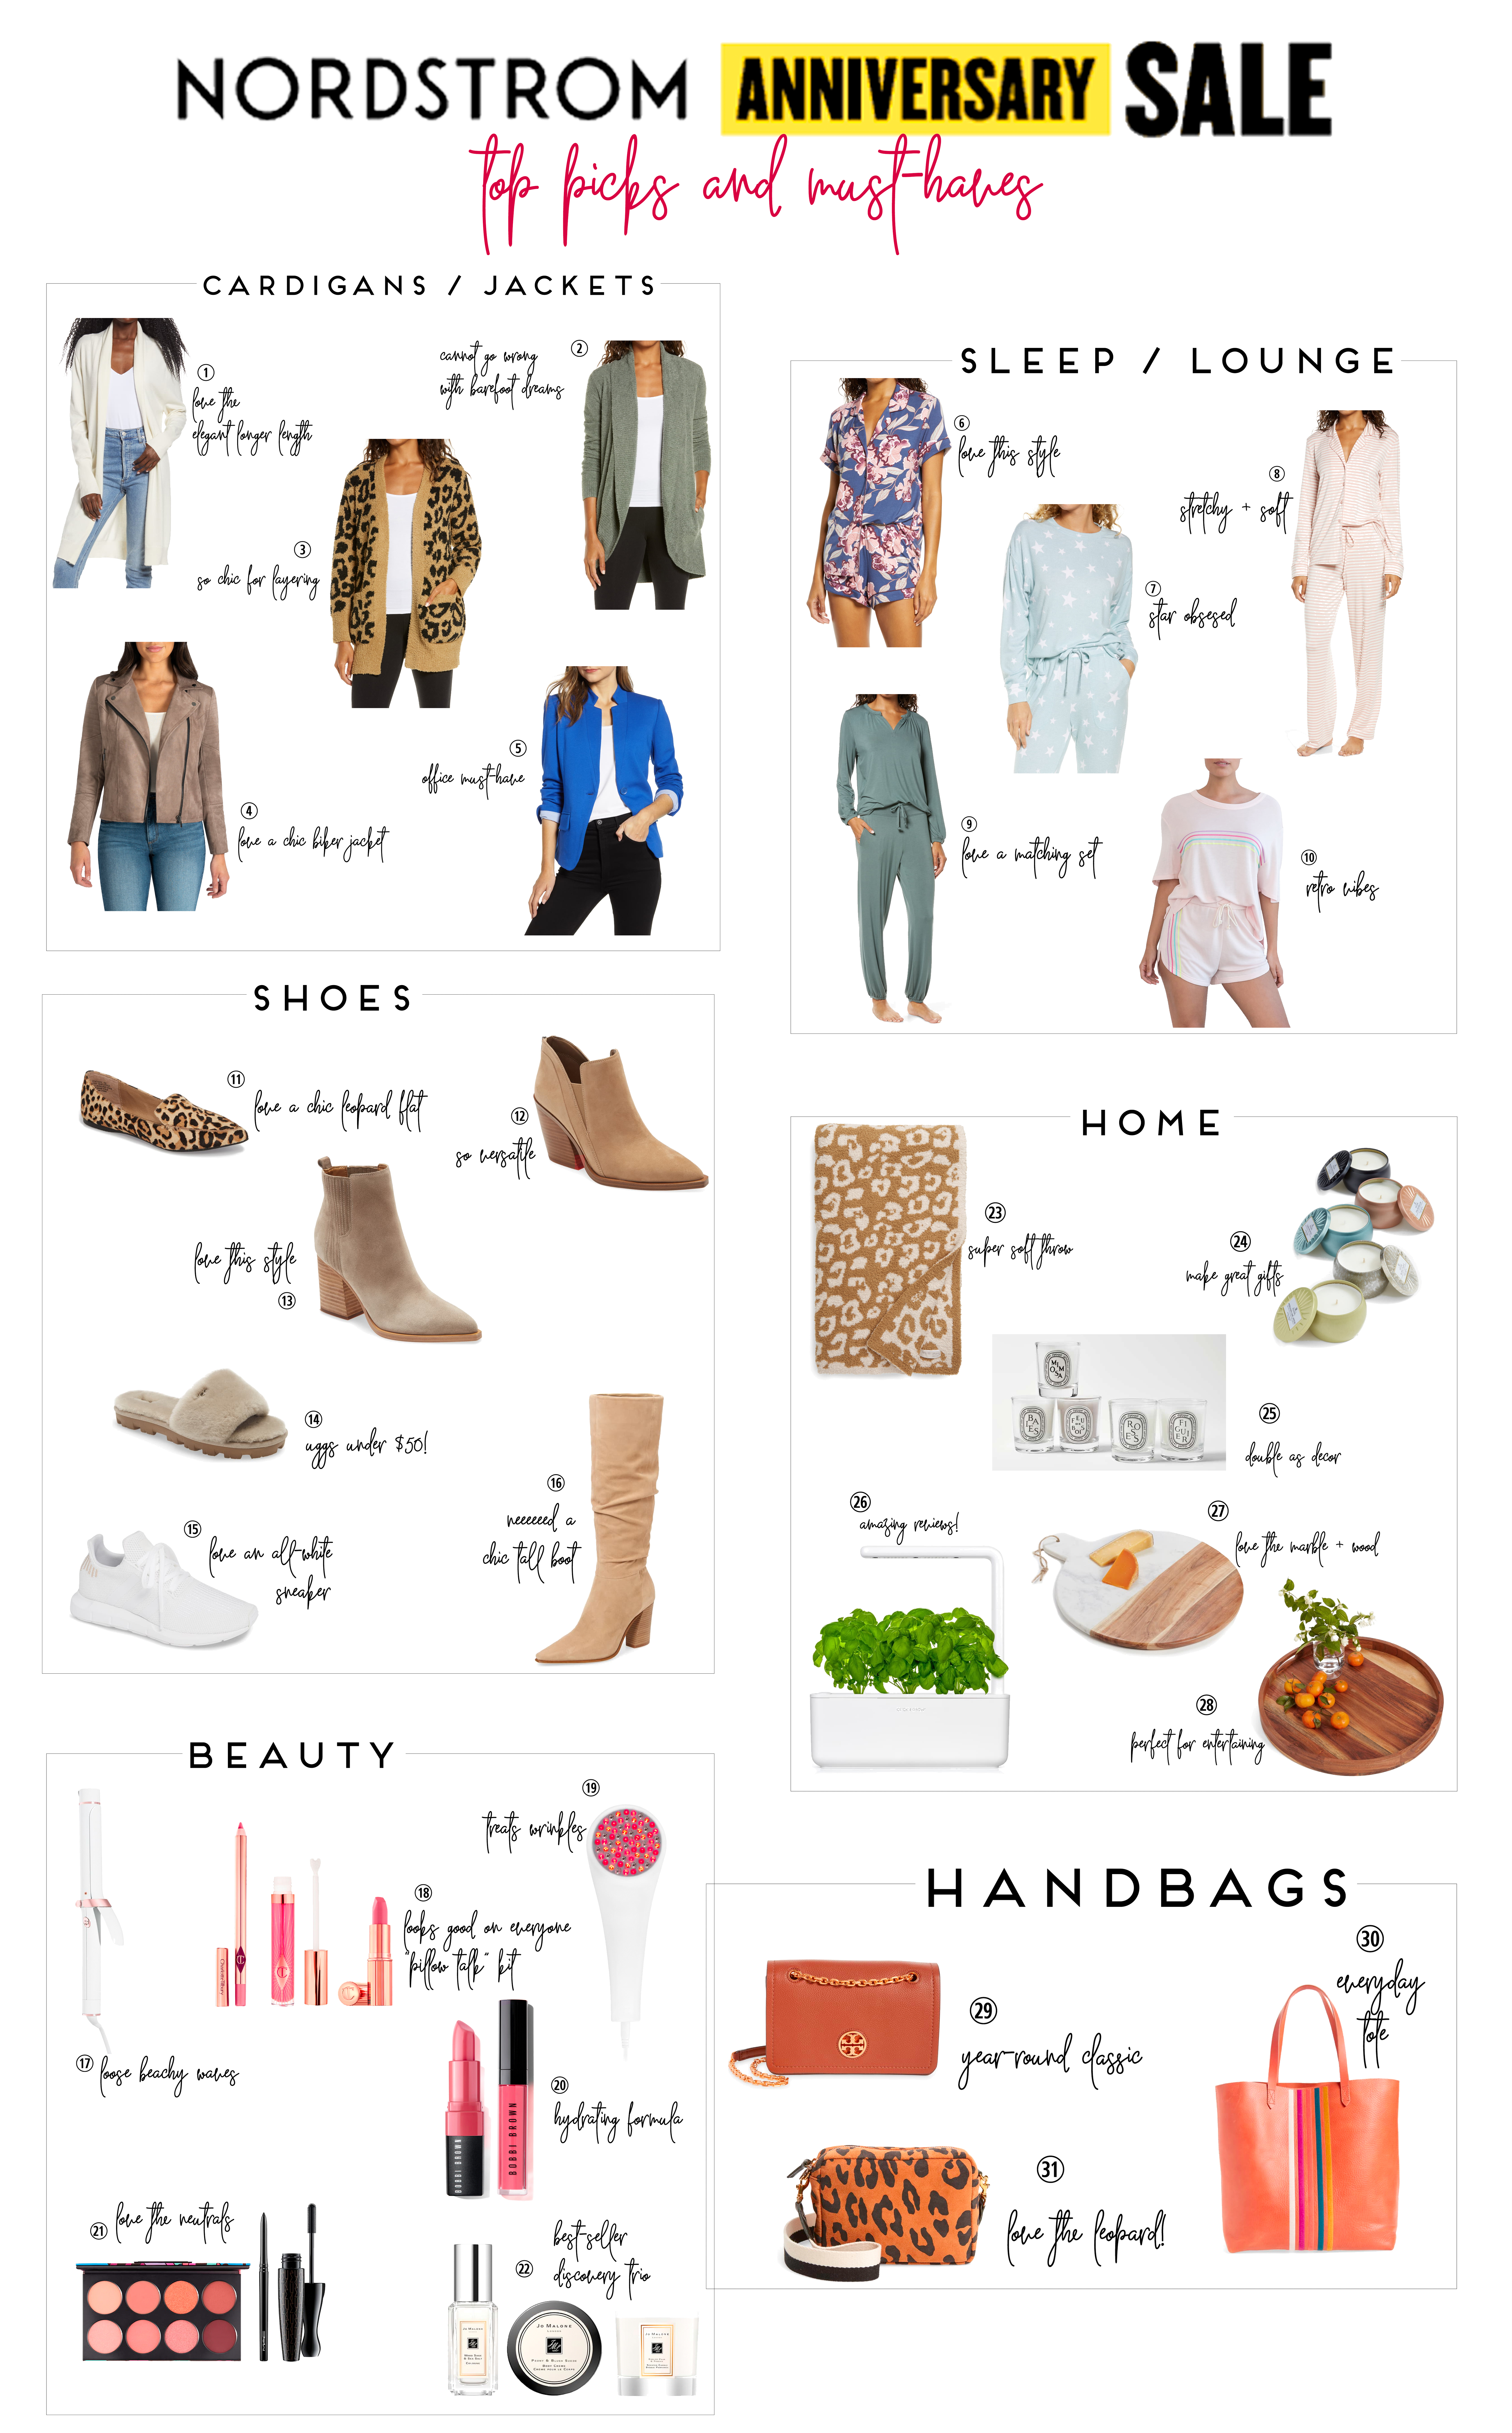 Nordstrom Anniversary Sale 2020: Top Must-Have Picks (+ GIVEAWAY!)